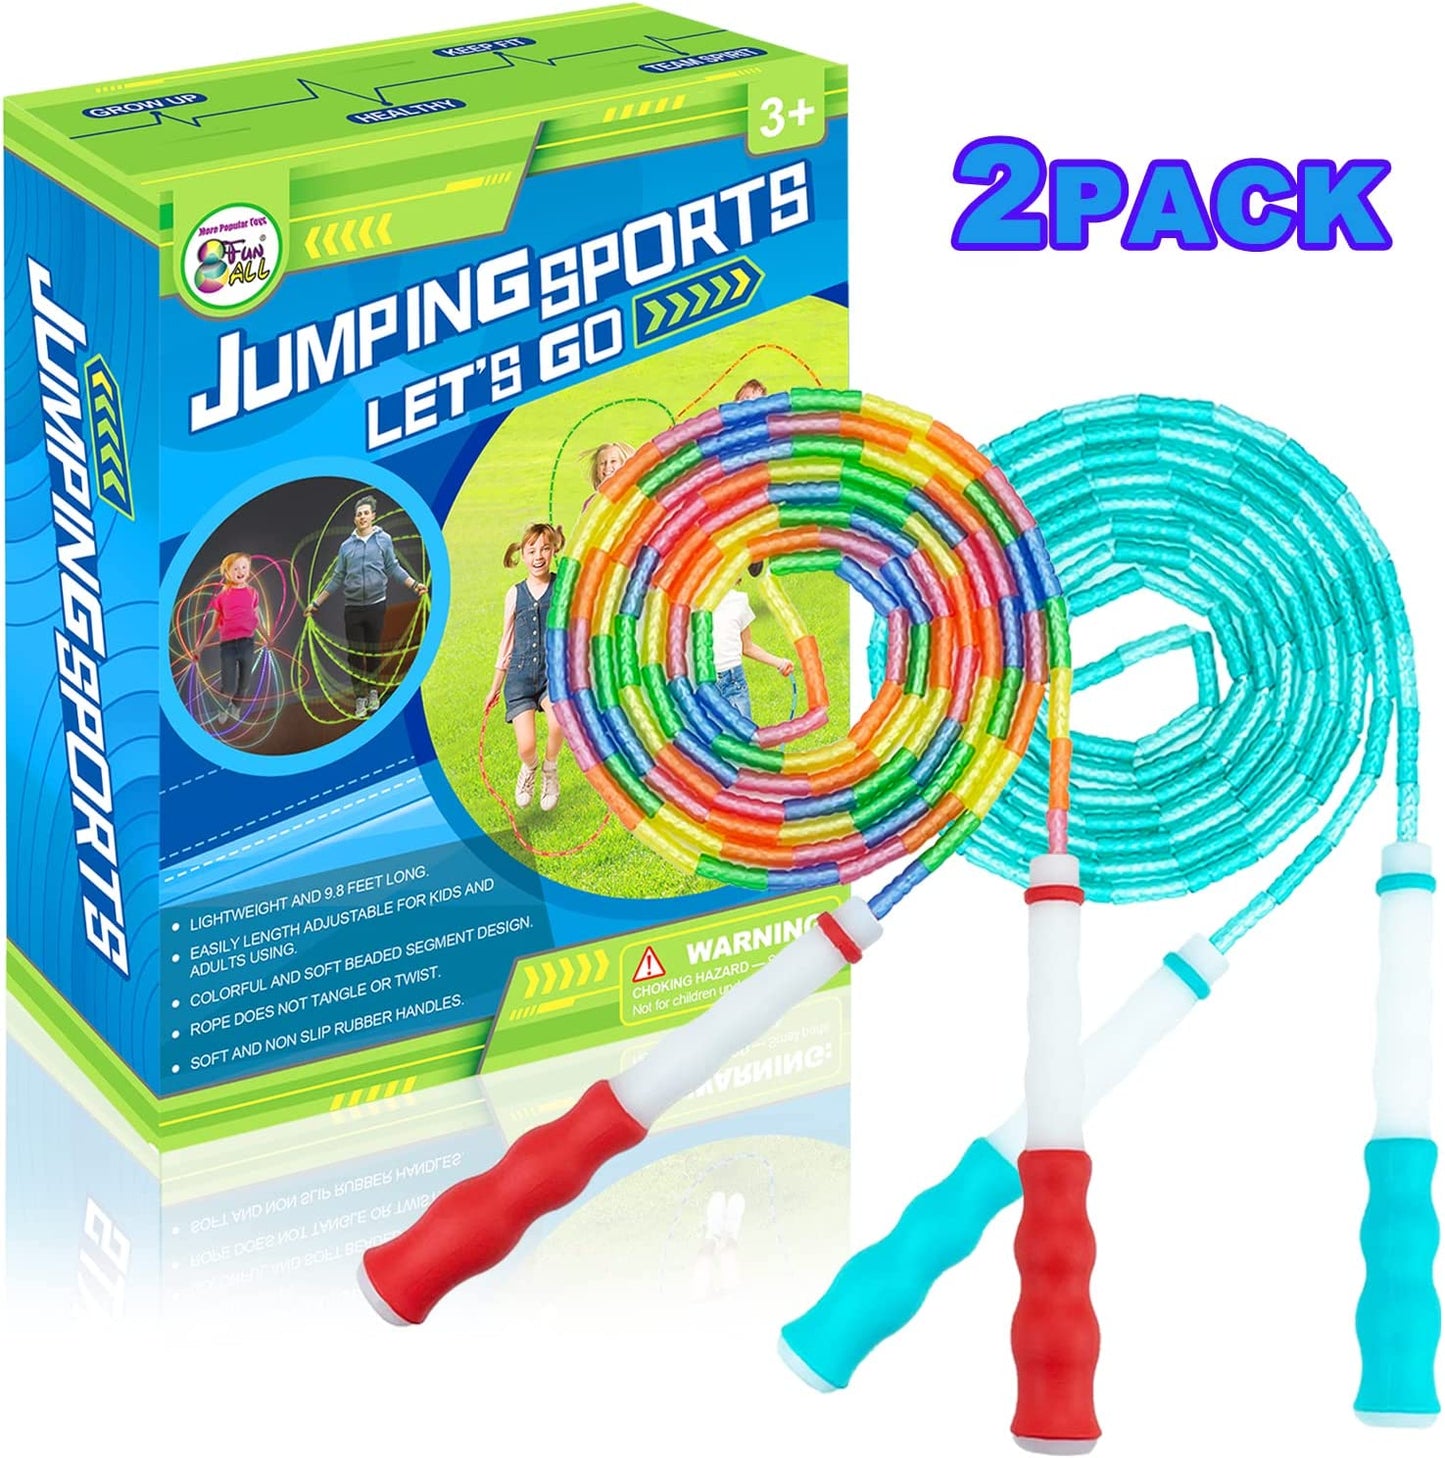 Jump Rope | Soft Beaded Jump Rope & Skipping Rope & Speed Rope adjustable for Kids Toddler Boys Girls Women Fitness Training Workout, 9 Feet 2 Pack